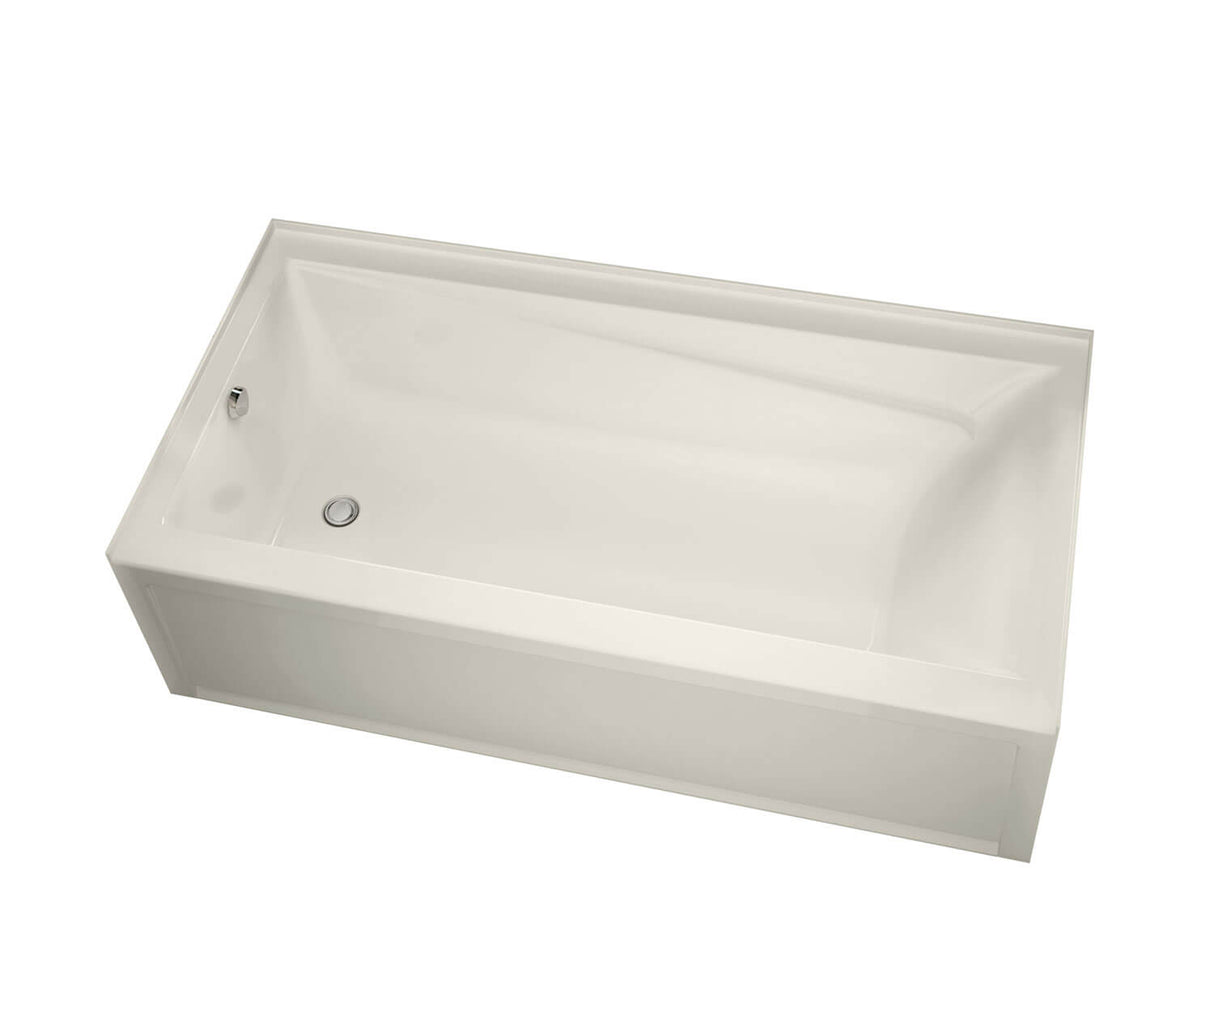 MAAX 105511-003-007-002 Exhibit 6030 IFS AFR Acrylic Alcove Right-Hand Drain Whirlpool Bathtub in Biscuit